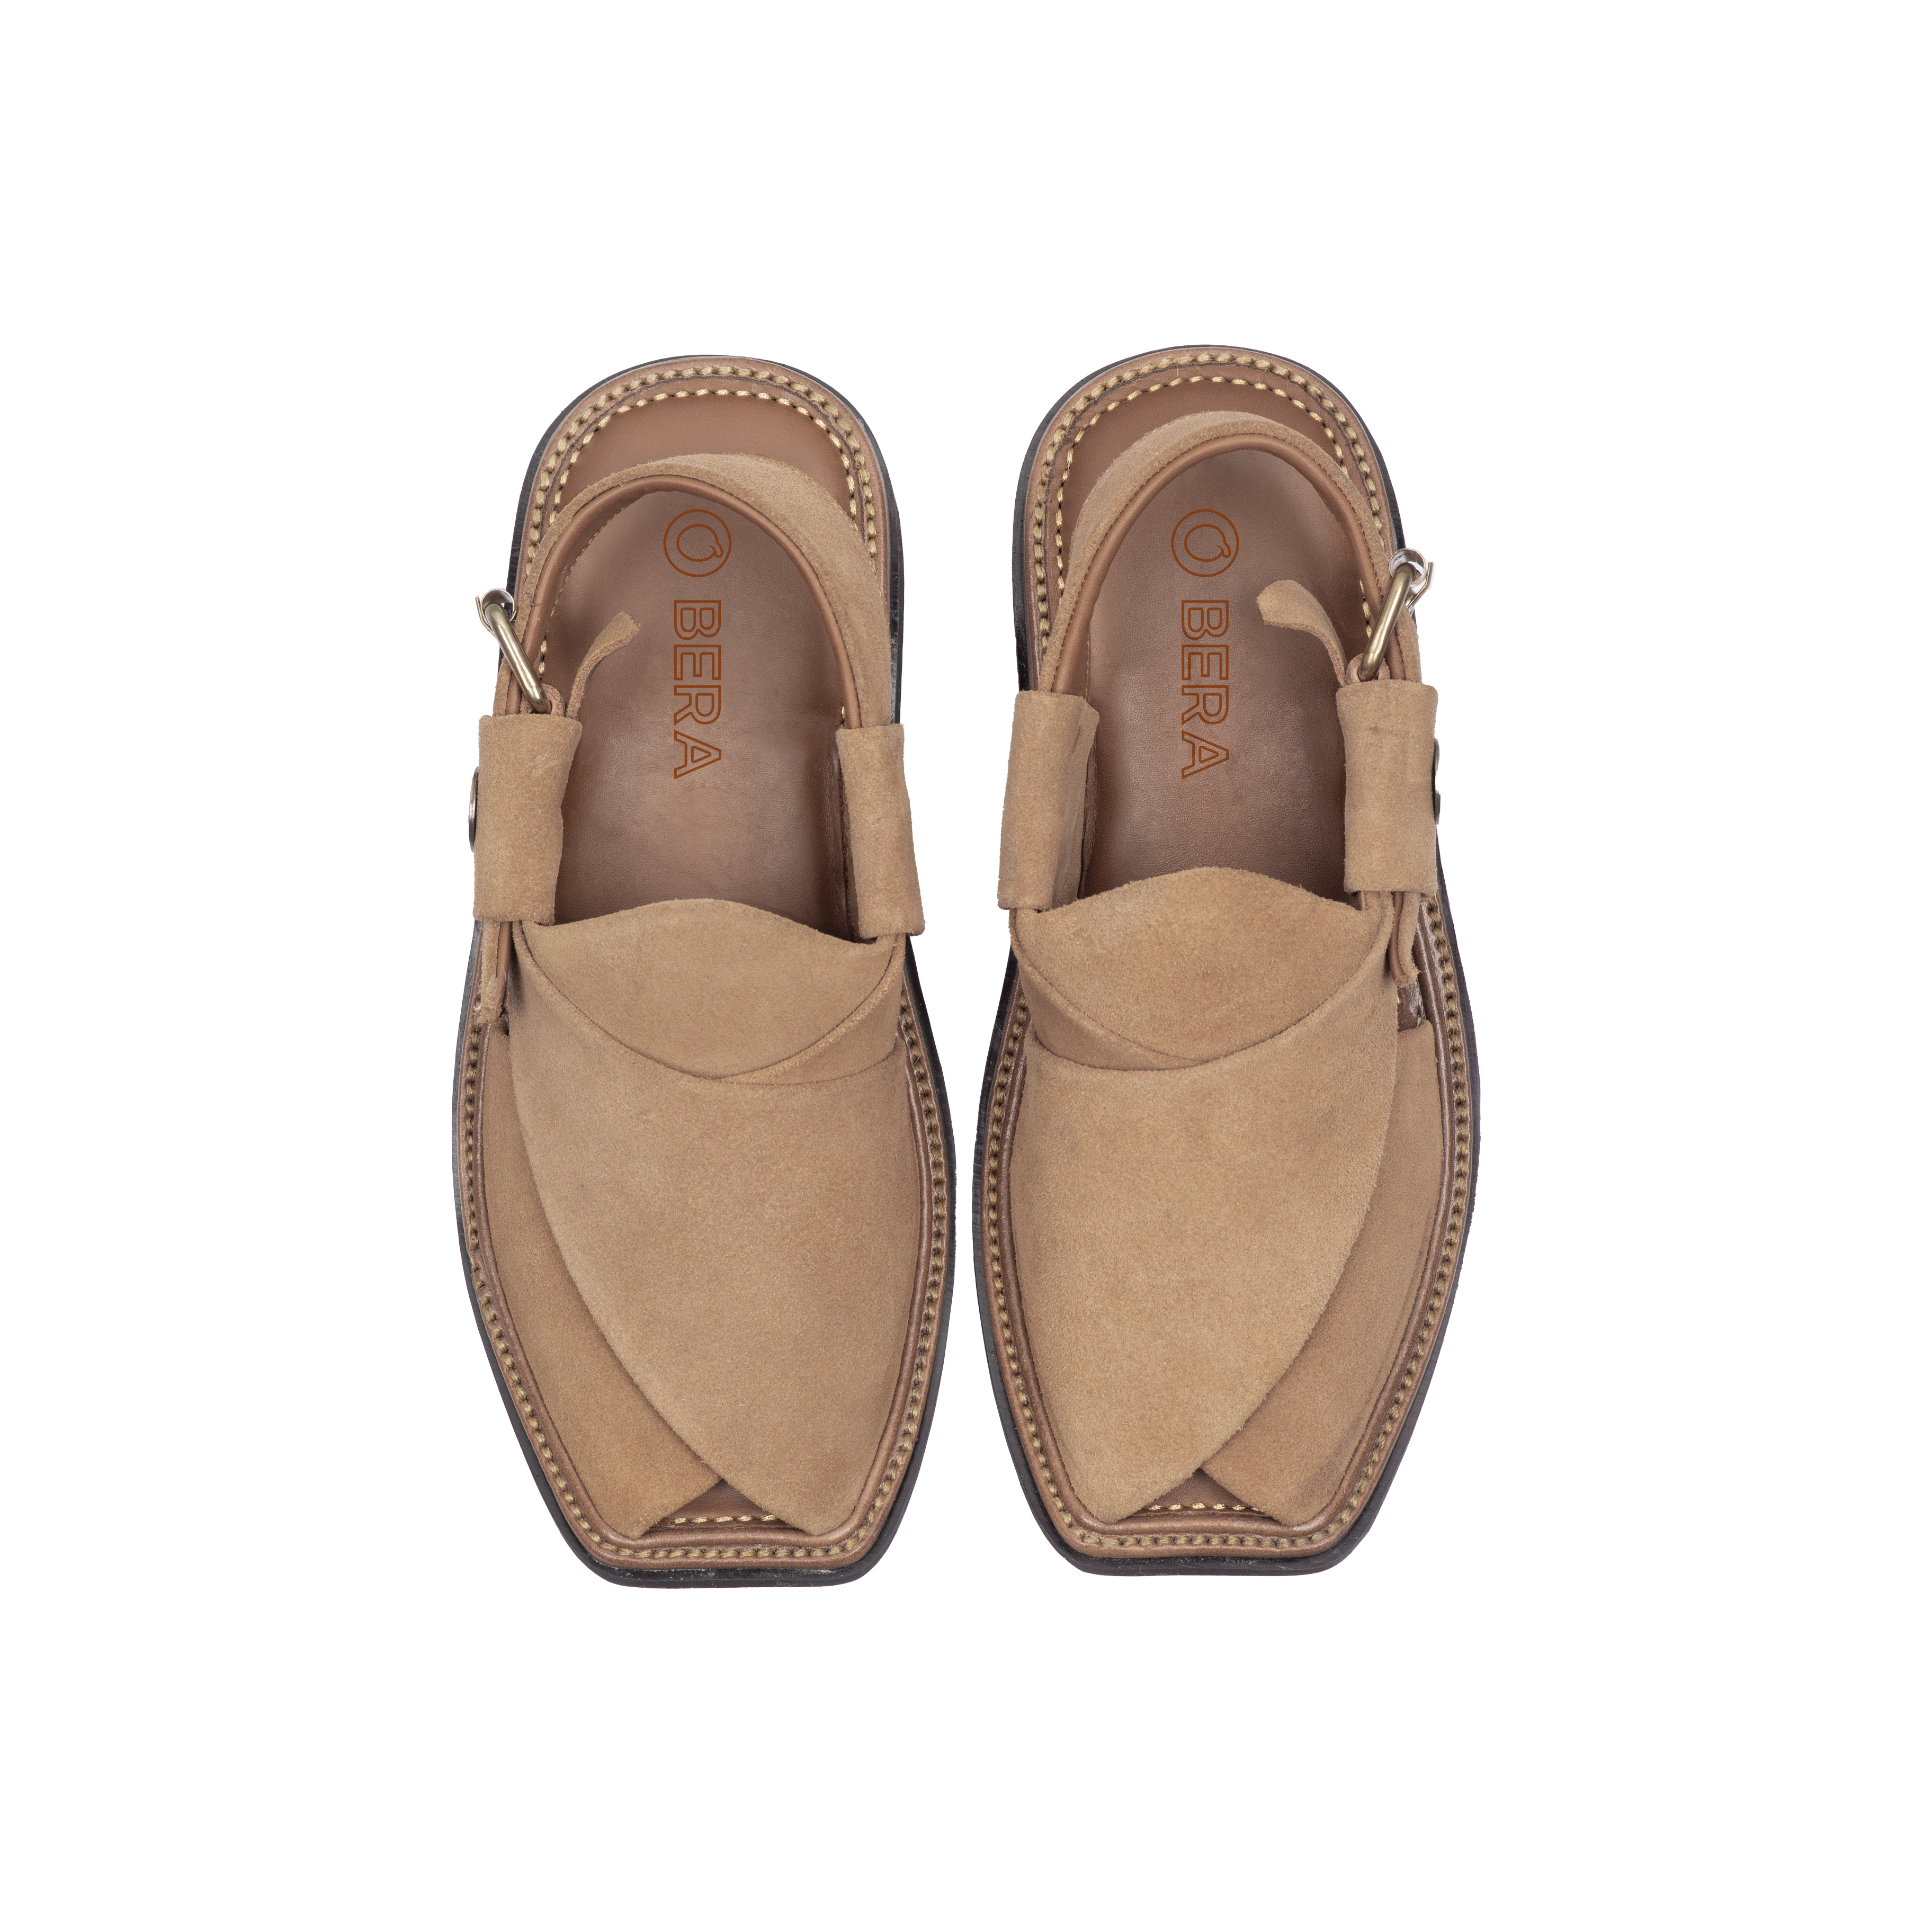 Suede Traditional Camel classic shoes for men-BERA